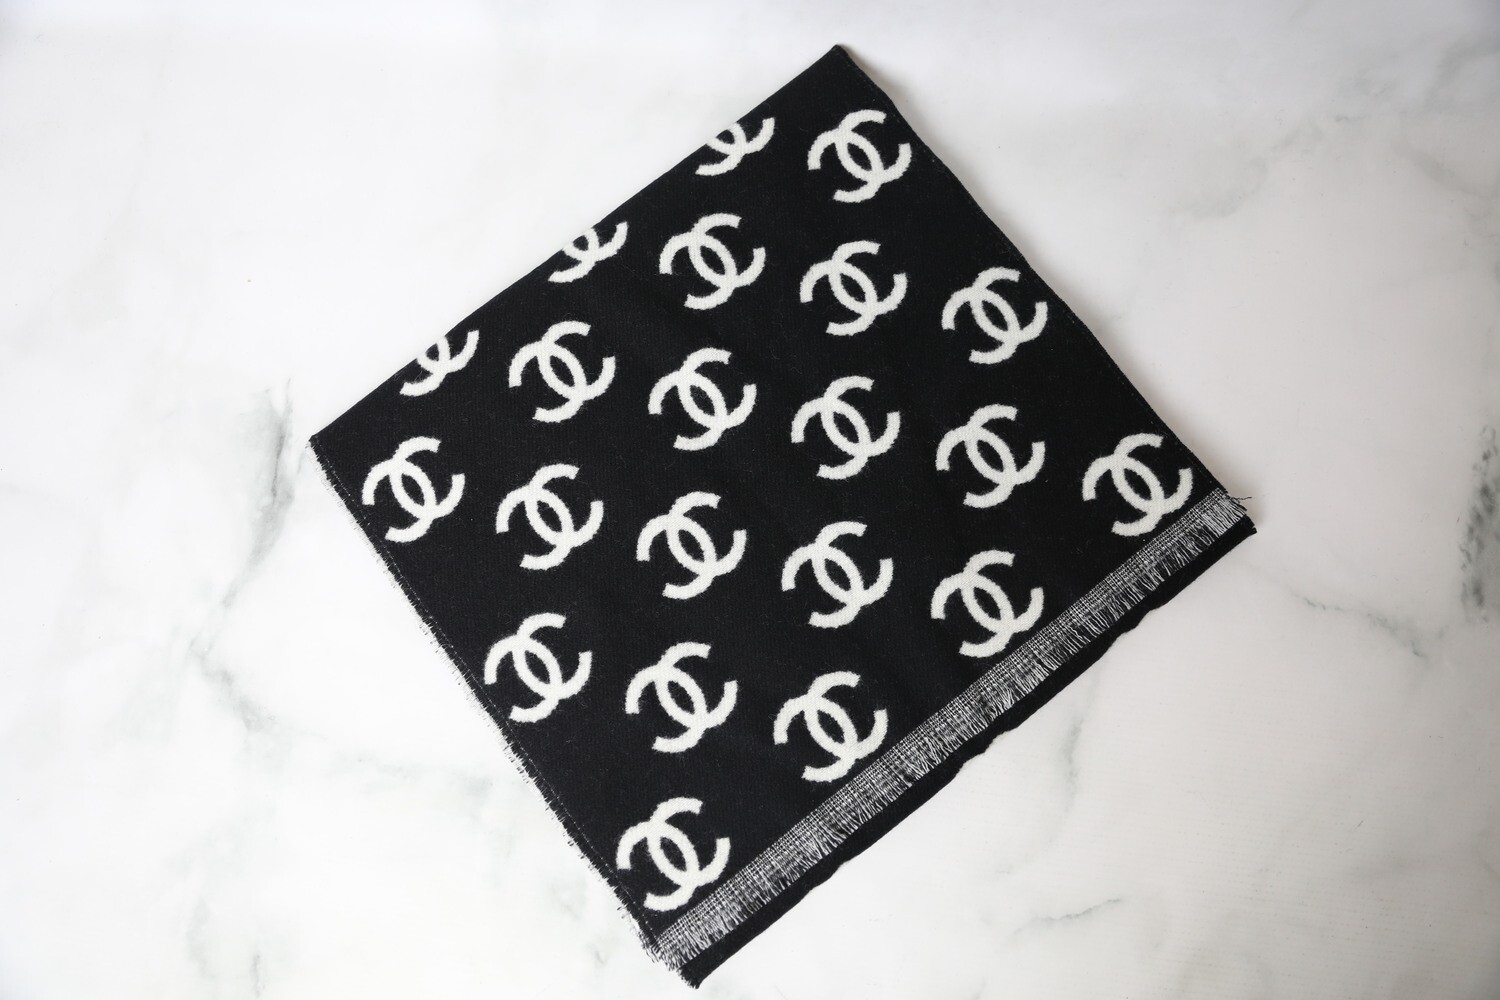 Chanel Wool and Cashmere Scarf, Black and White, New